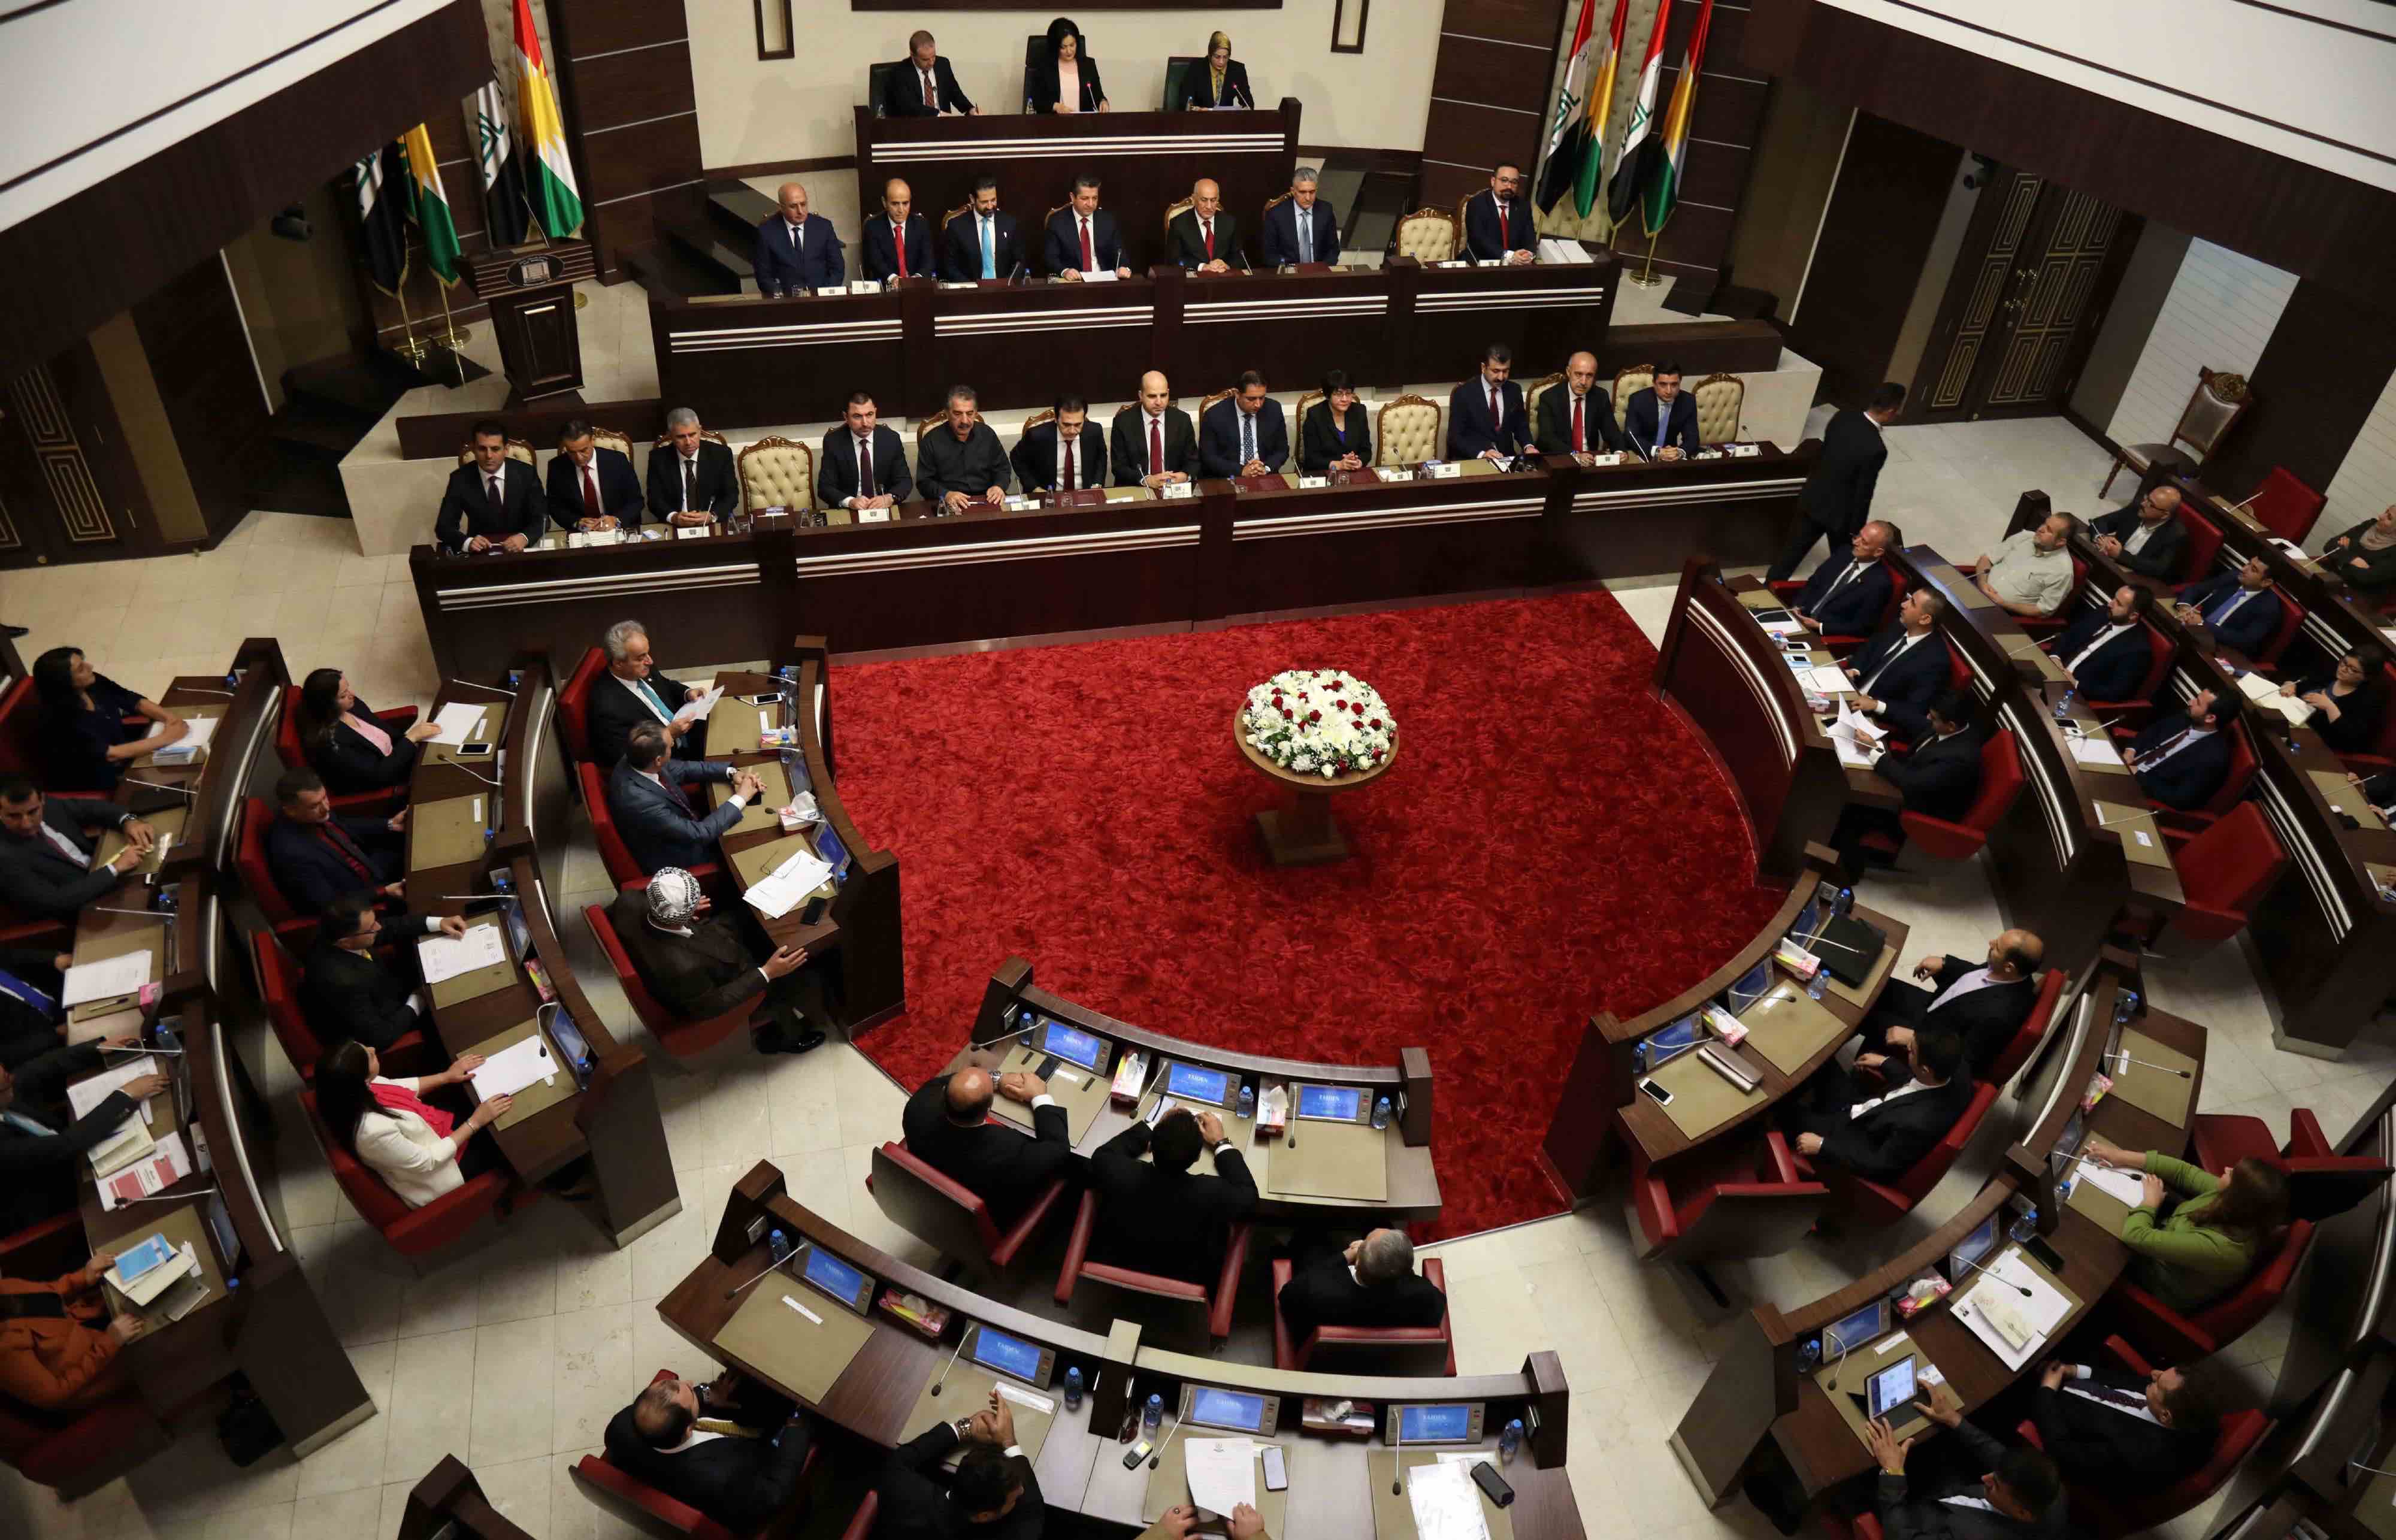 Not a single Kurdish lawmaker attended the federal parliament's vote to oust foreign troops, declining to take a stance on the controversial issue.